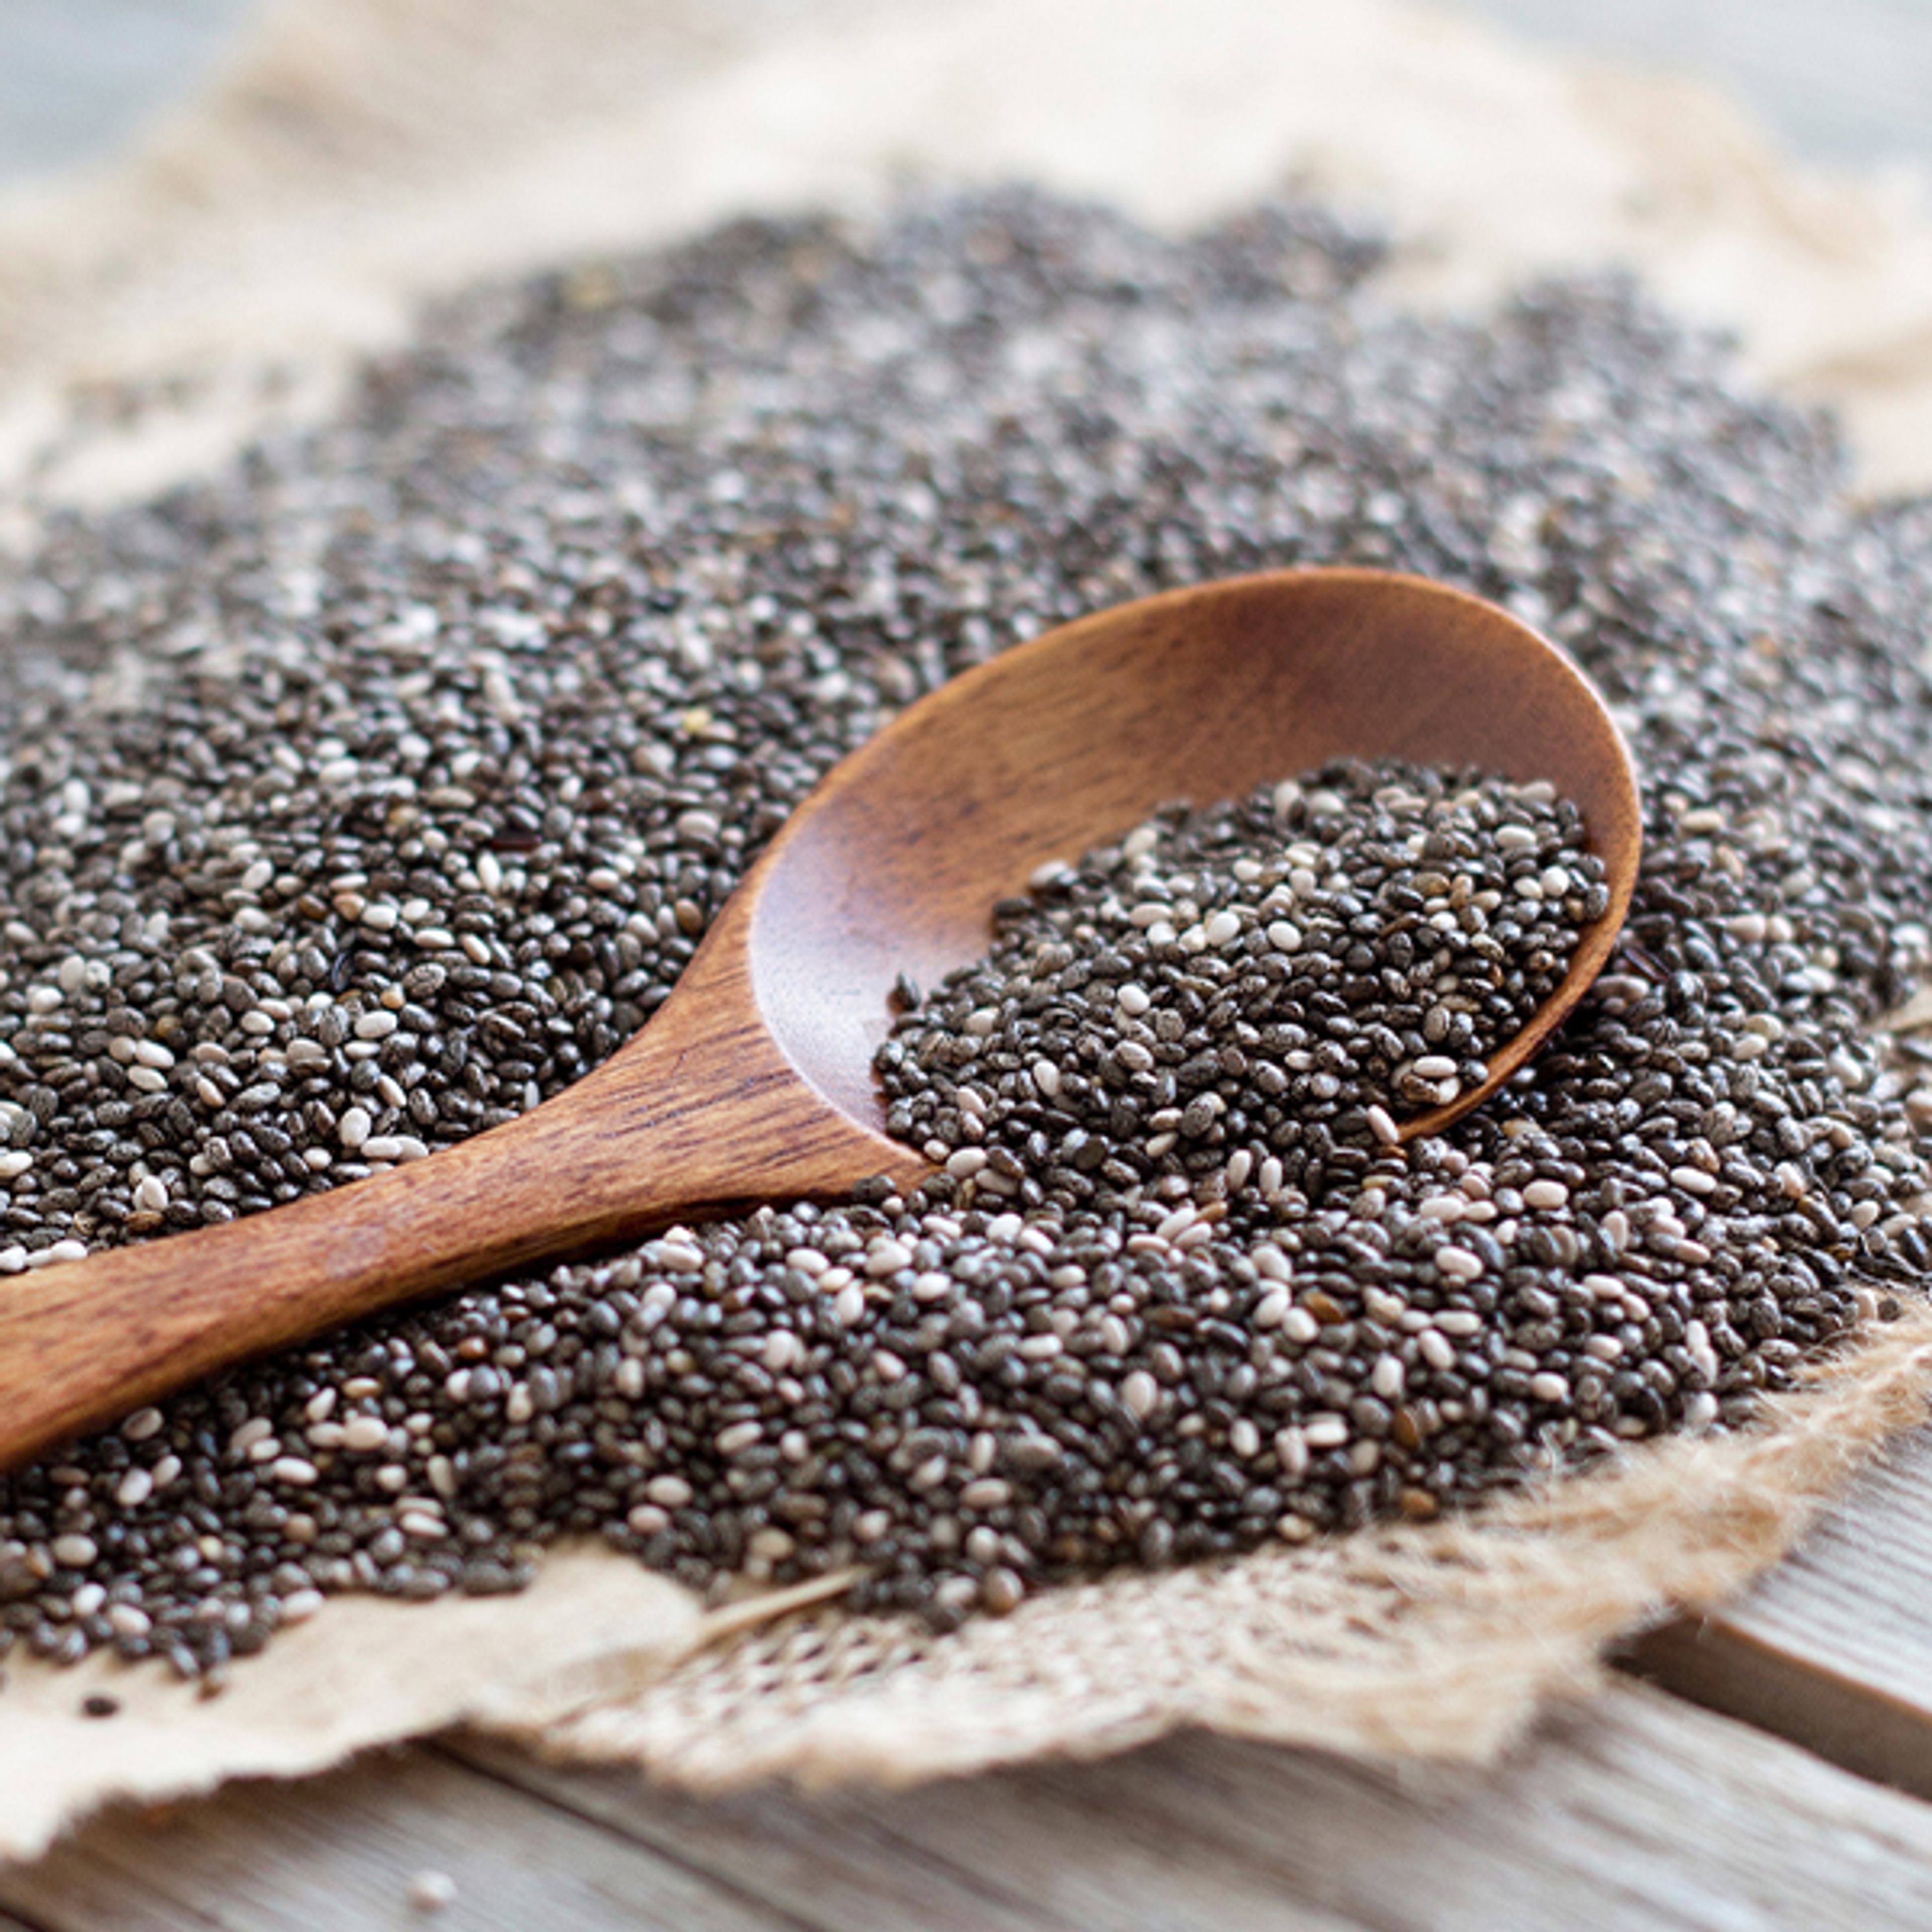 Chia seeds - The superfood rich in vital substances